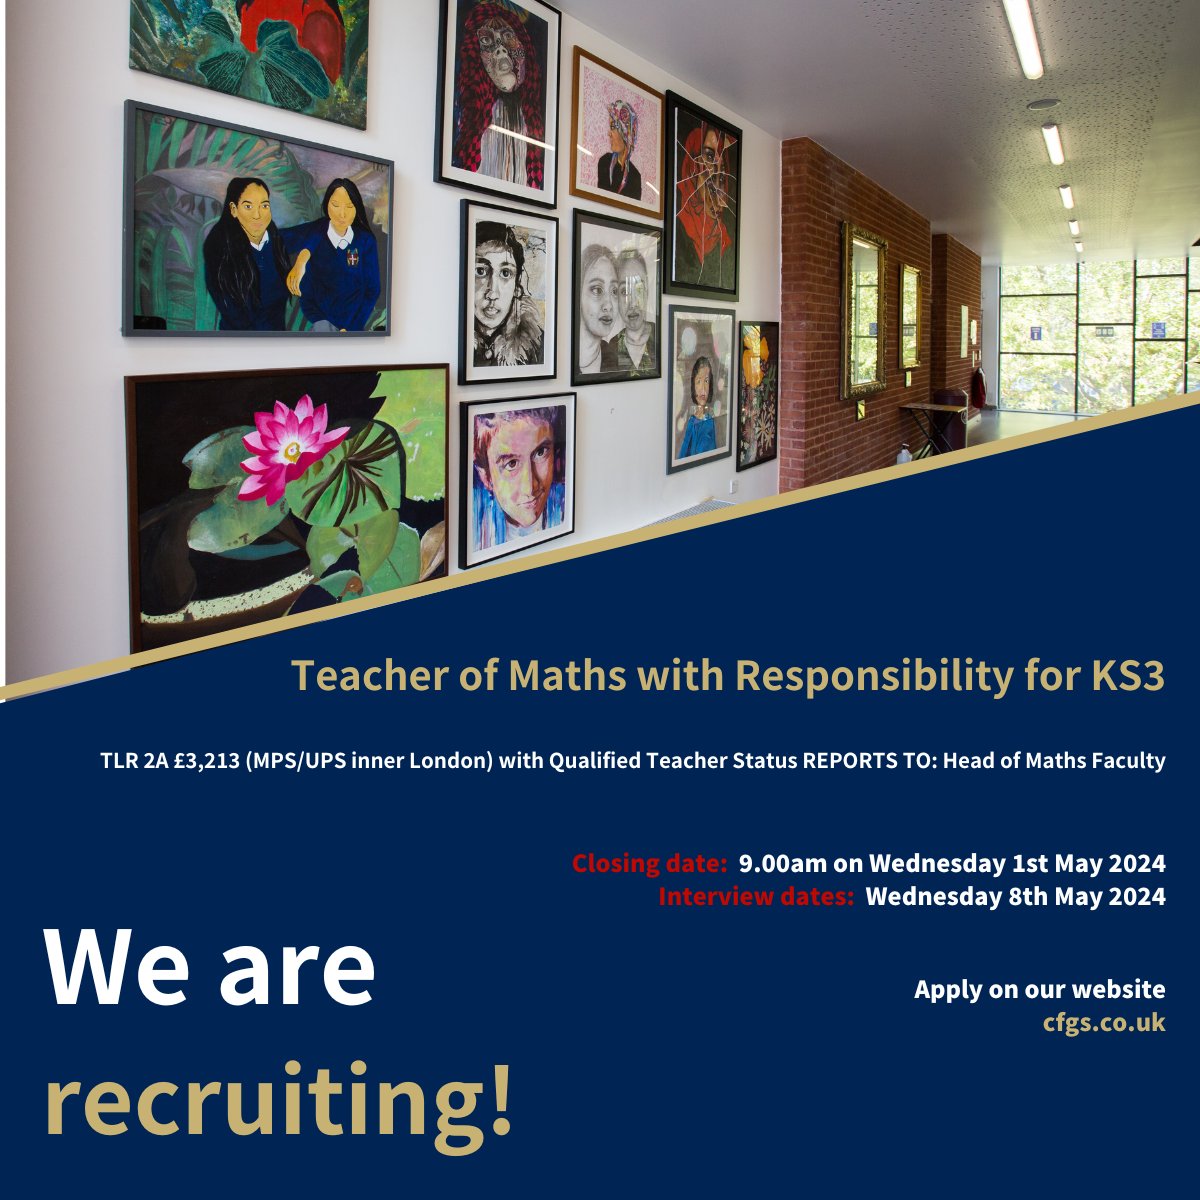 We're searching for a dynamic Teacher of Maths with Responsibility for KS3 to join our team. Closing date: 9:00 am, Wednesday, May 1st, 2024 Interview date: Wednesday, May 8th, 2024 Apply Now cfgs.co.uk/Teaching-Staff…